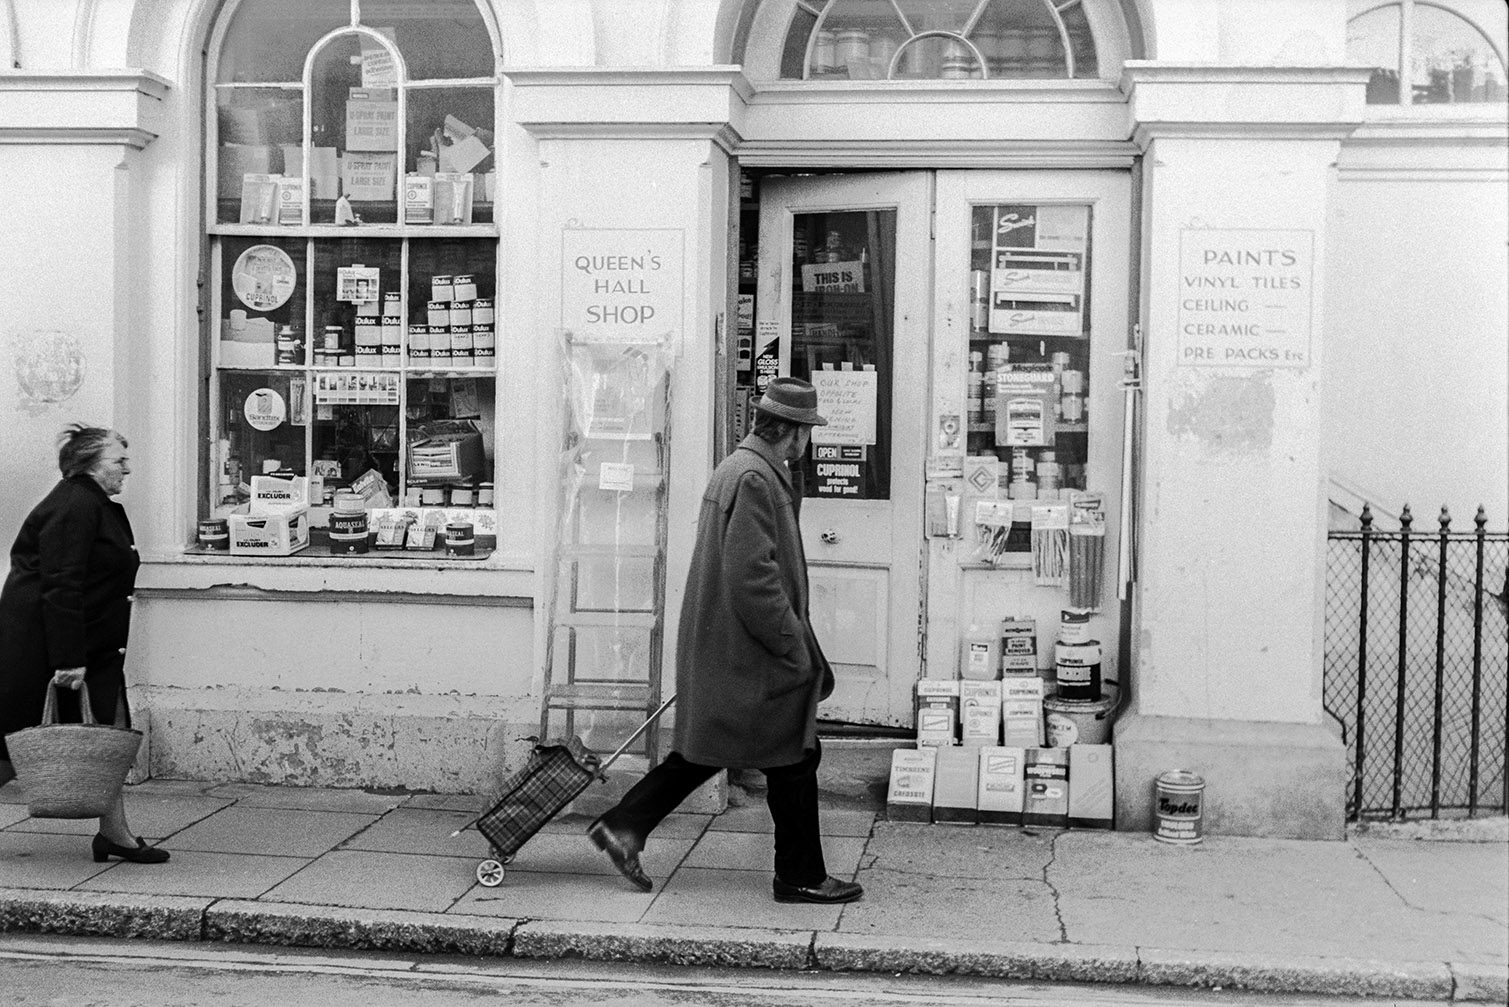 A man and woman walking past the 'Queens Hall Shop' in Barnstaple. Various goods, including tins of paint, are on display outside the shop and in the shop window.